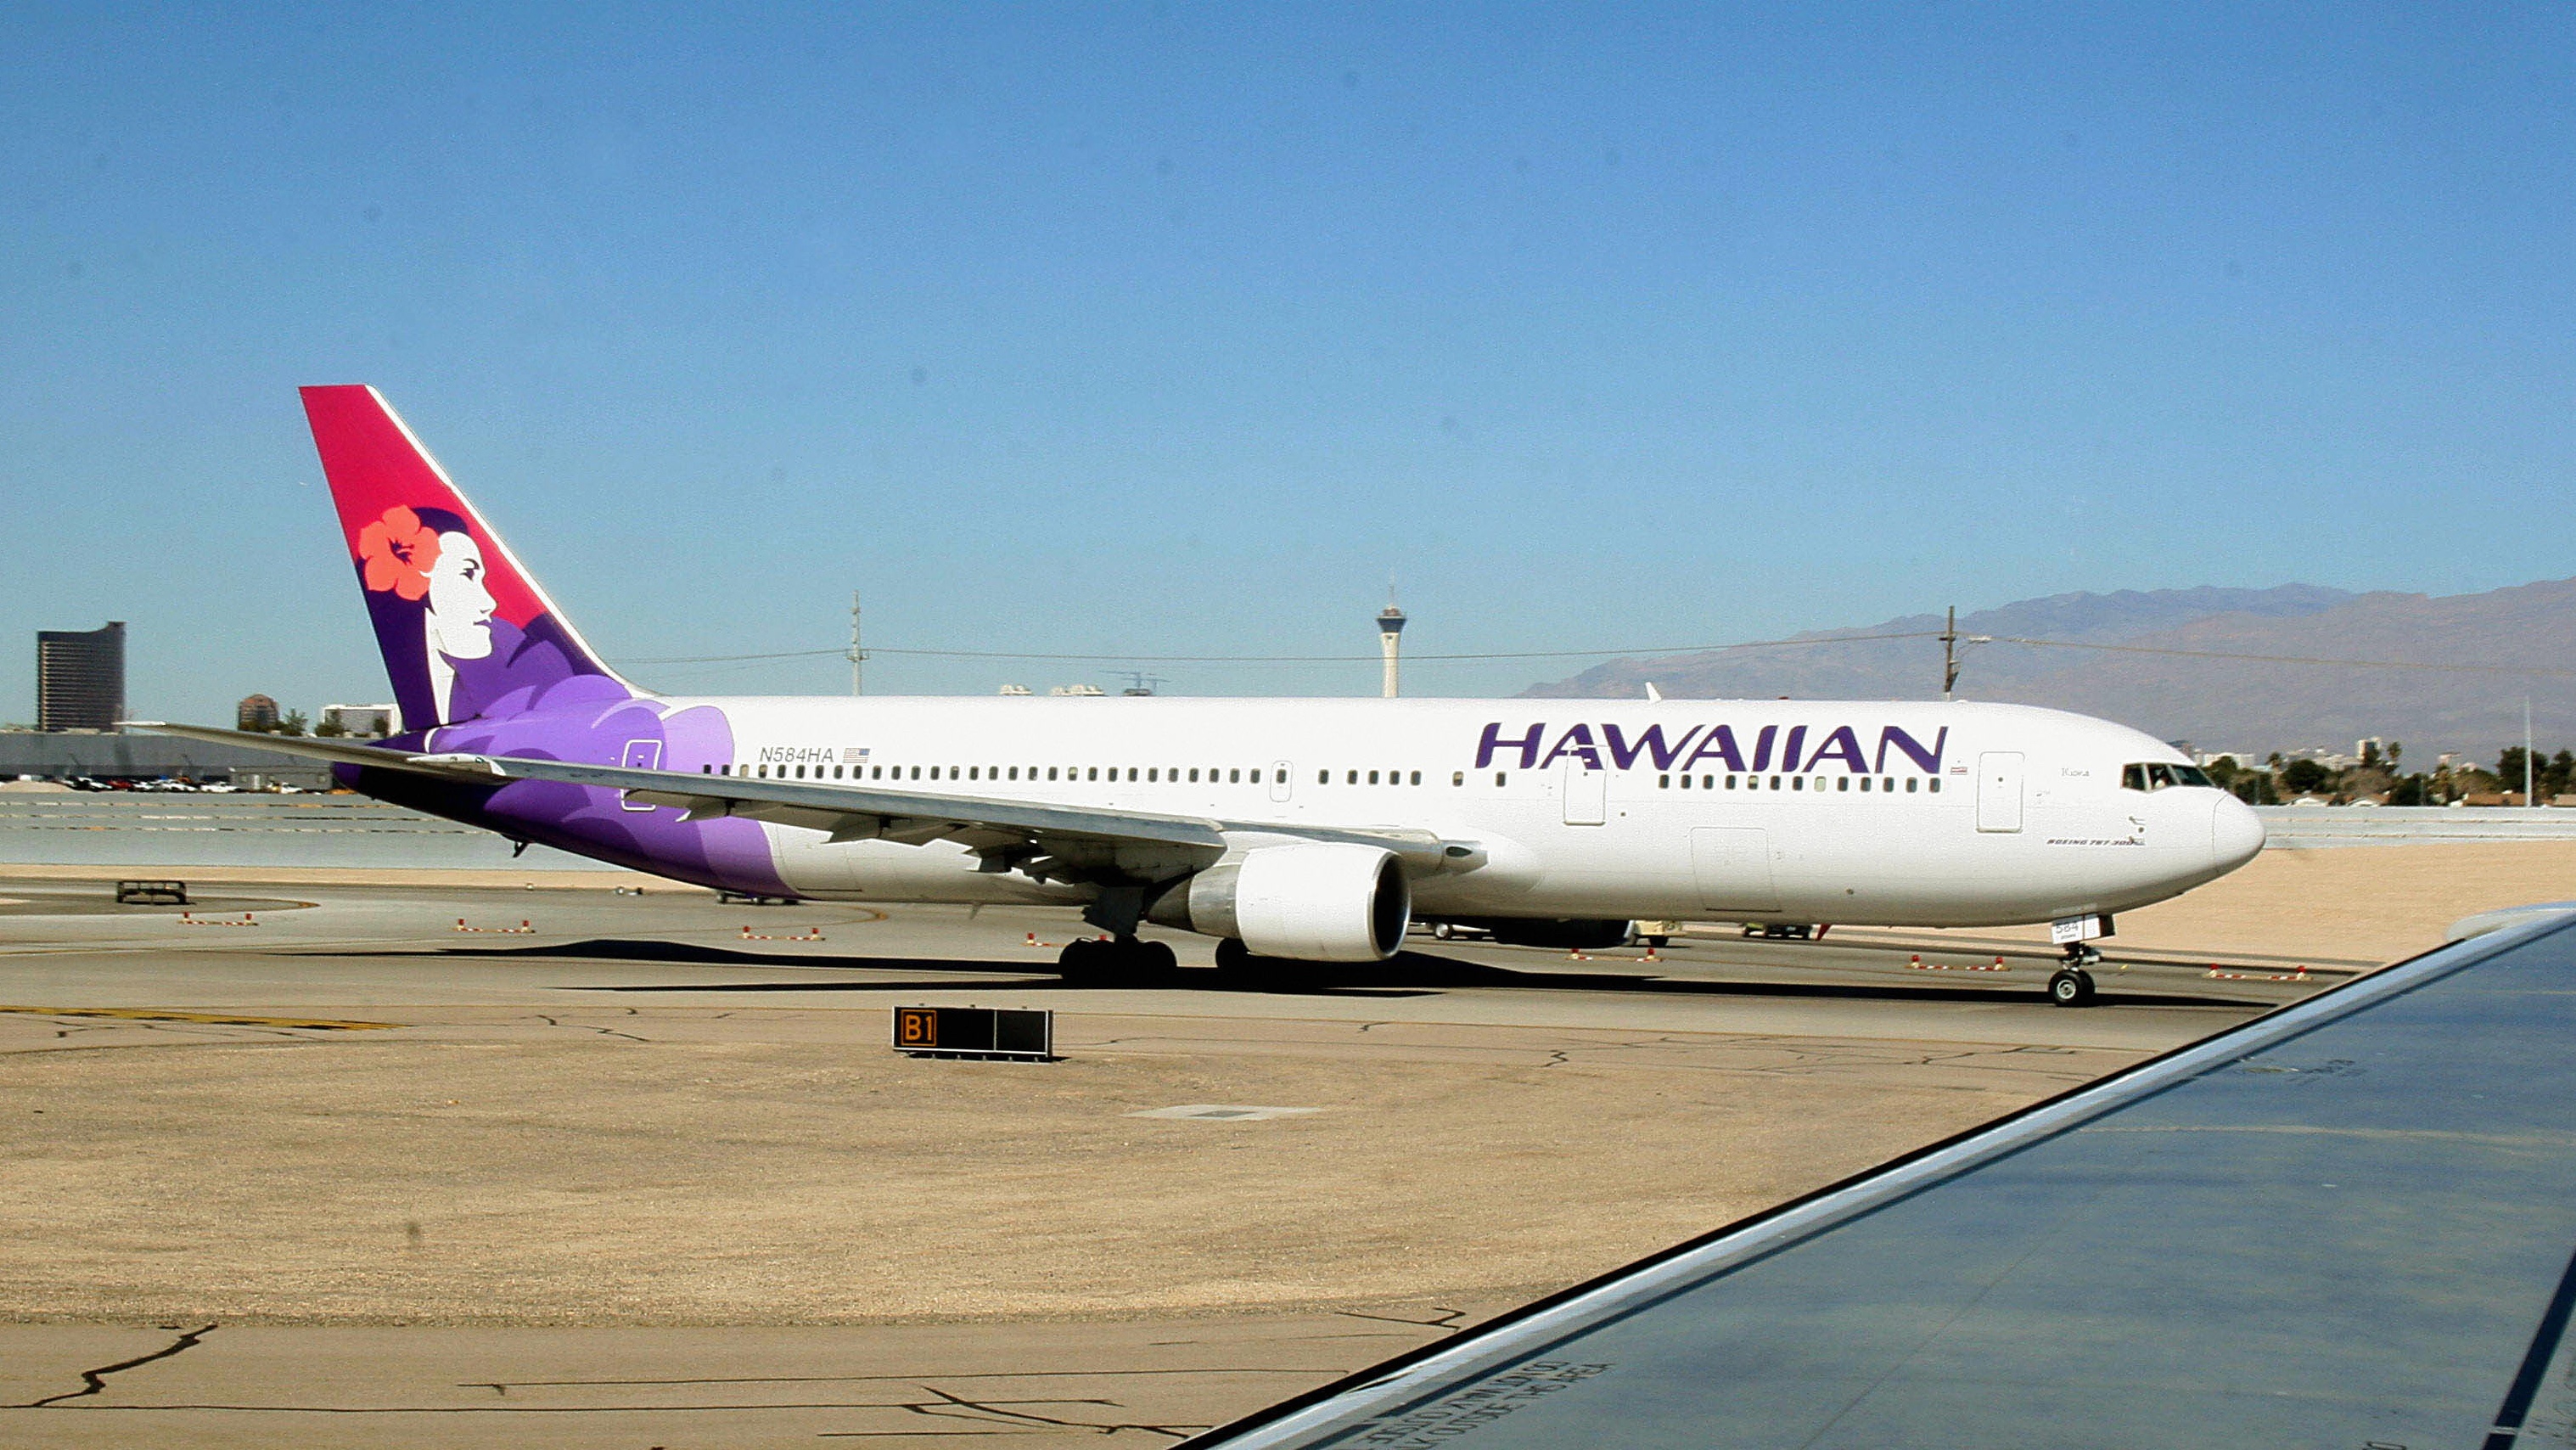 A Hawaiian Airlines jet